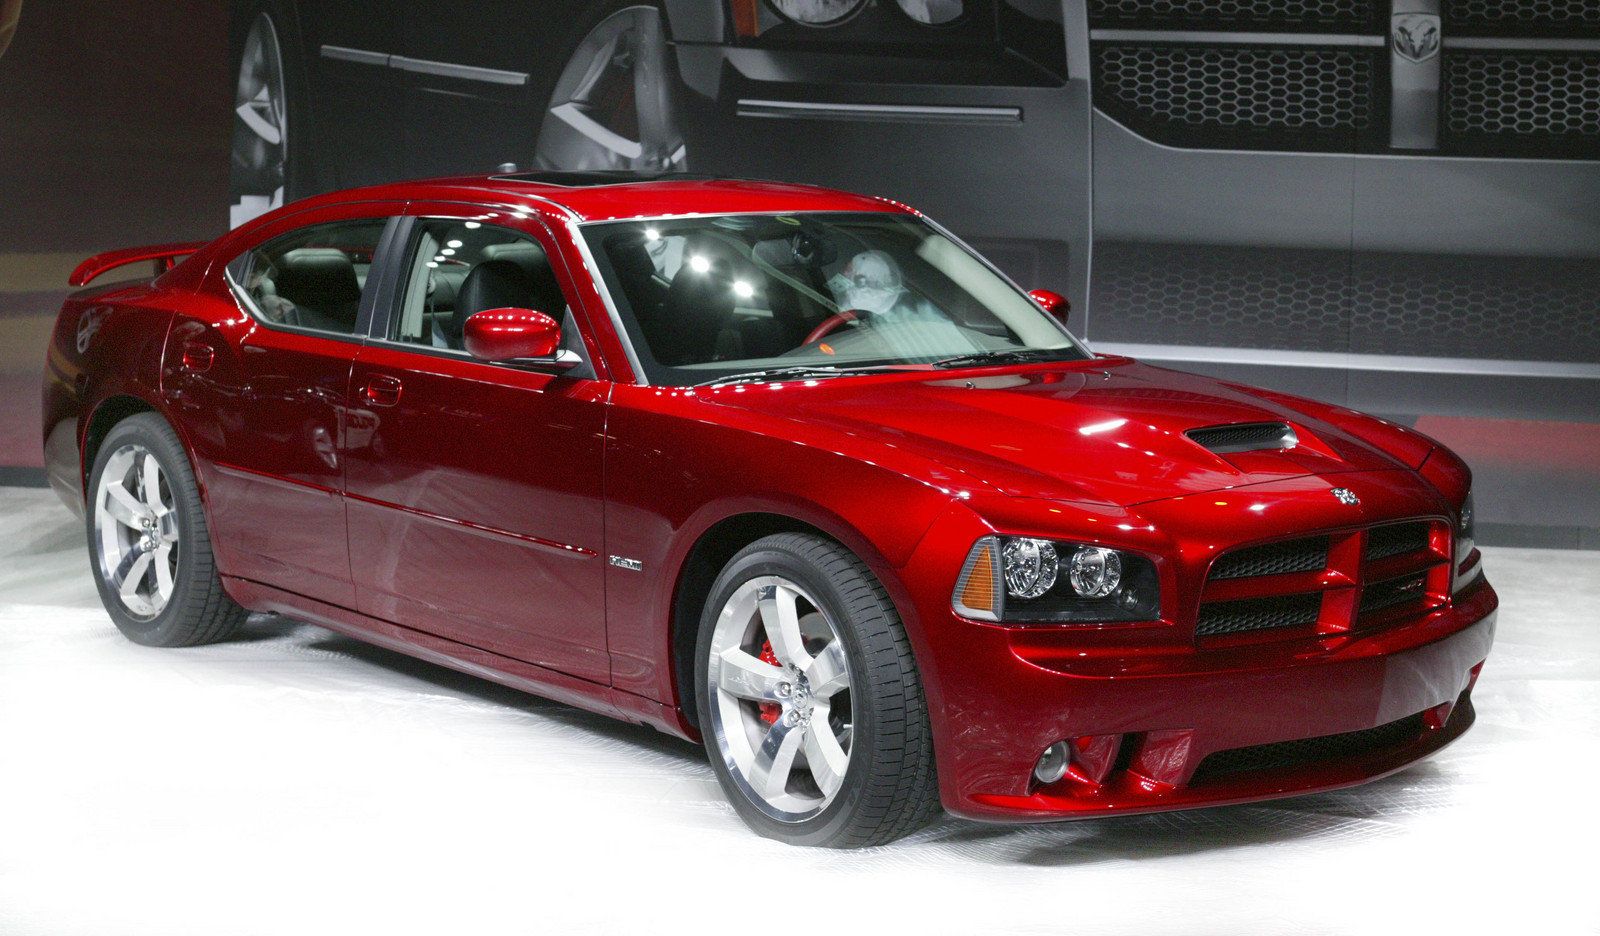 2008 Dodge Charger SXT 0-60 Times, Top Speed, Specs, Quarter Mile, and  Wallpapers - MyCarSpecs United States / USA